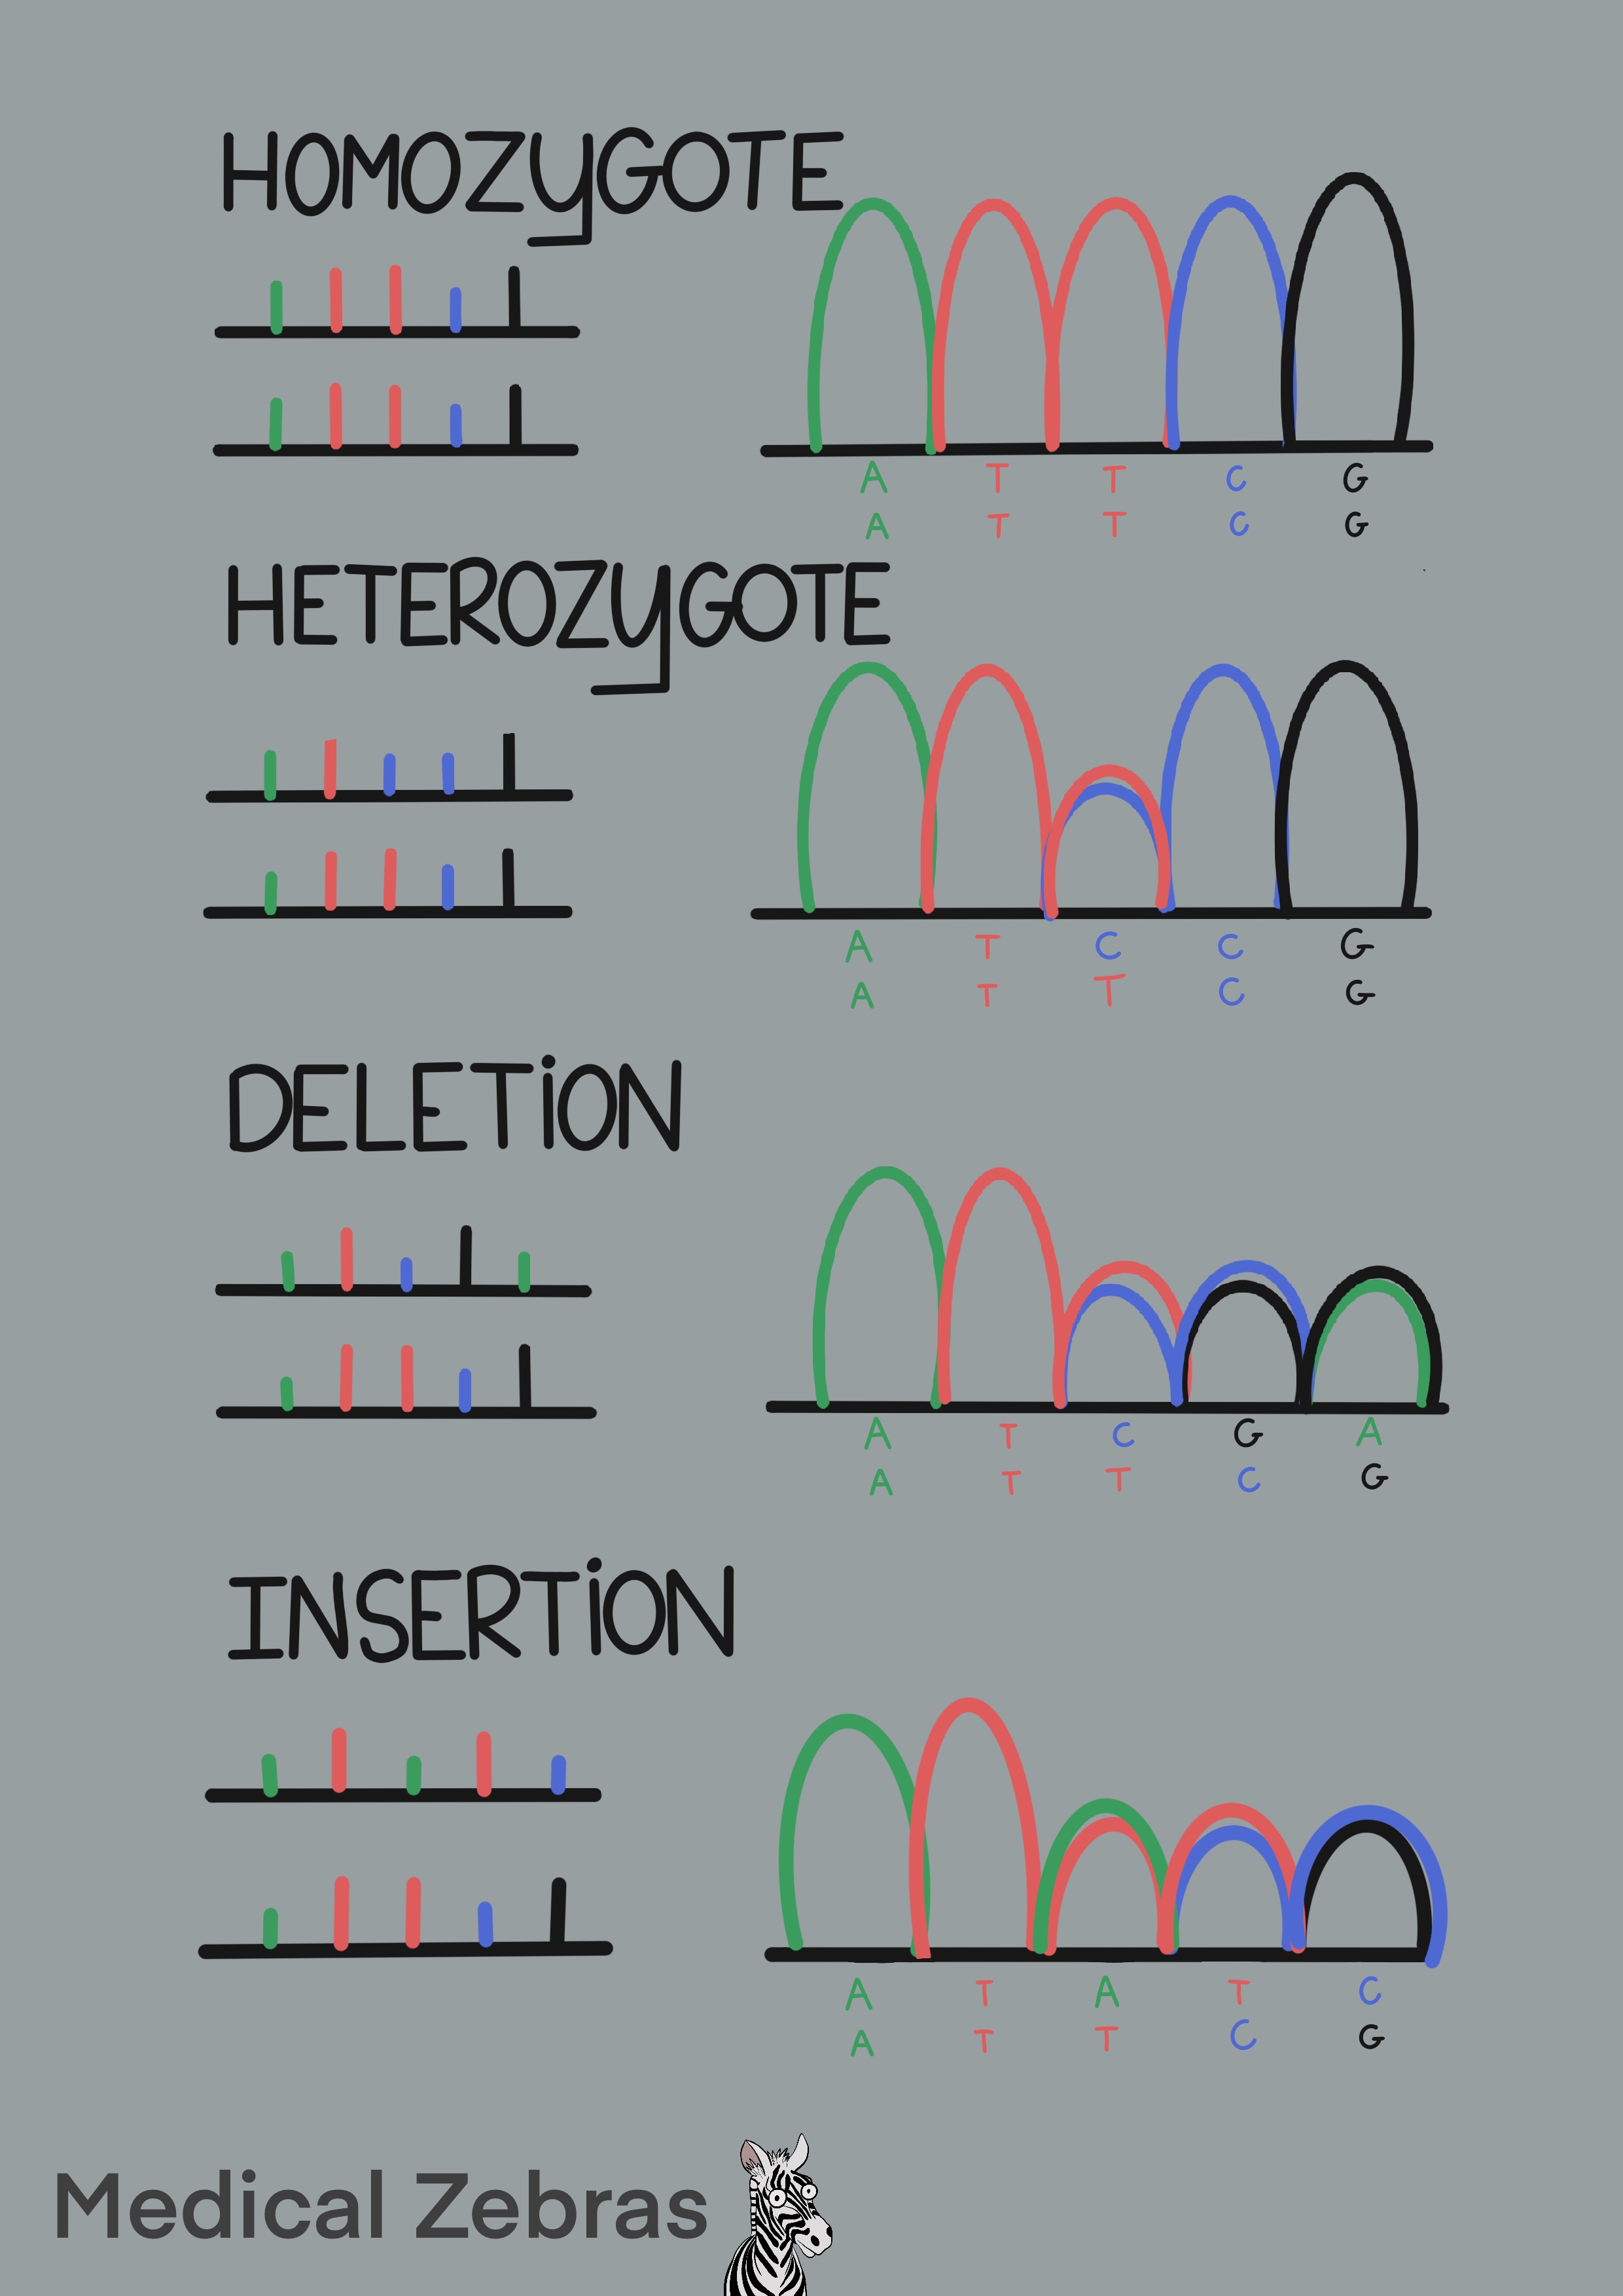 Sanger sequencing results examples